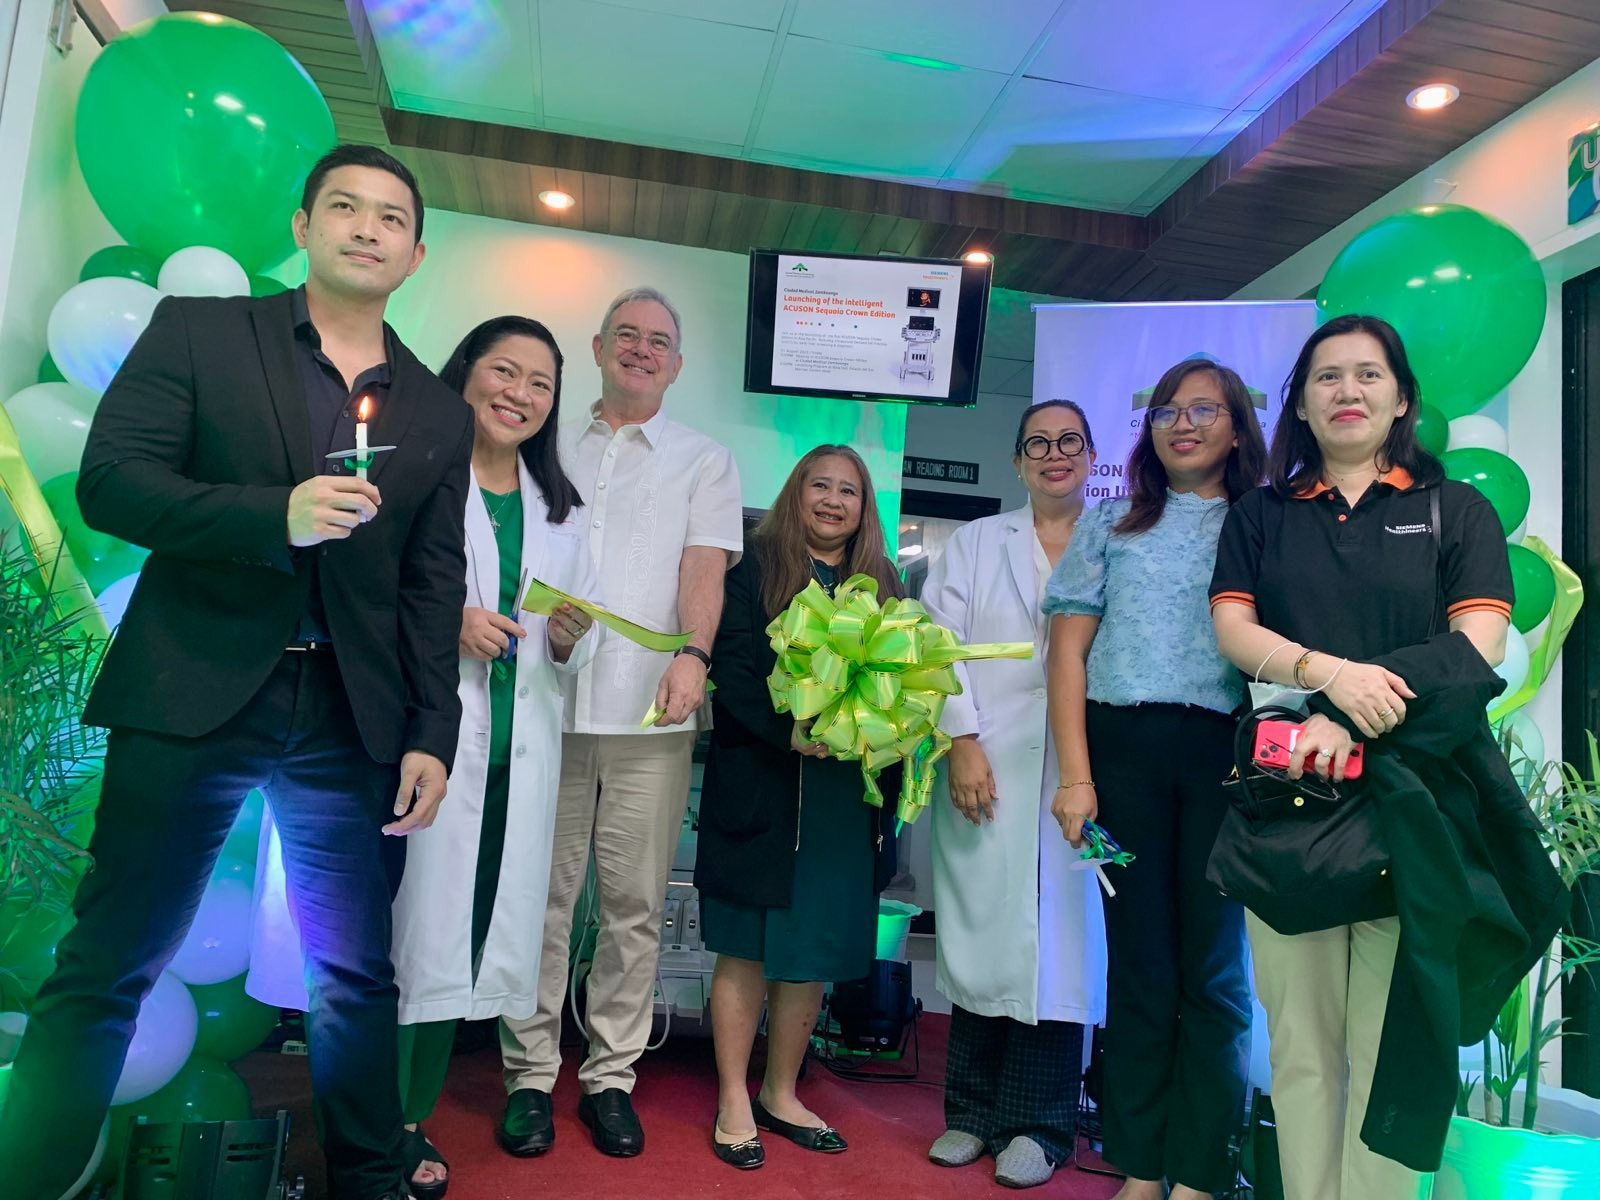 Ciudad Medical Zamboanga launches the first ACUSON Sequoia Crown Edition Ultrasound System for non-invasive liver screening